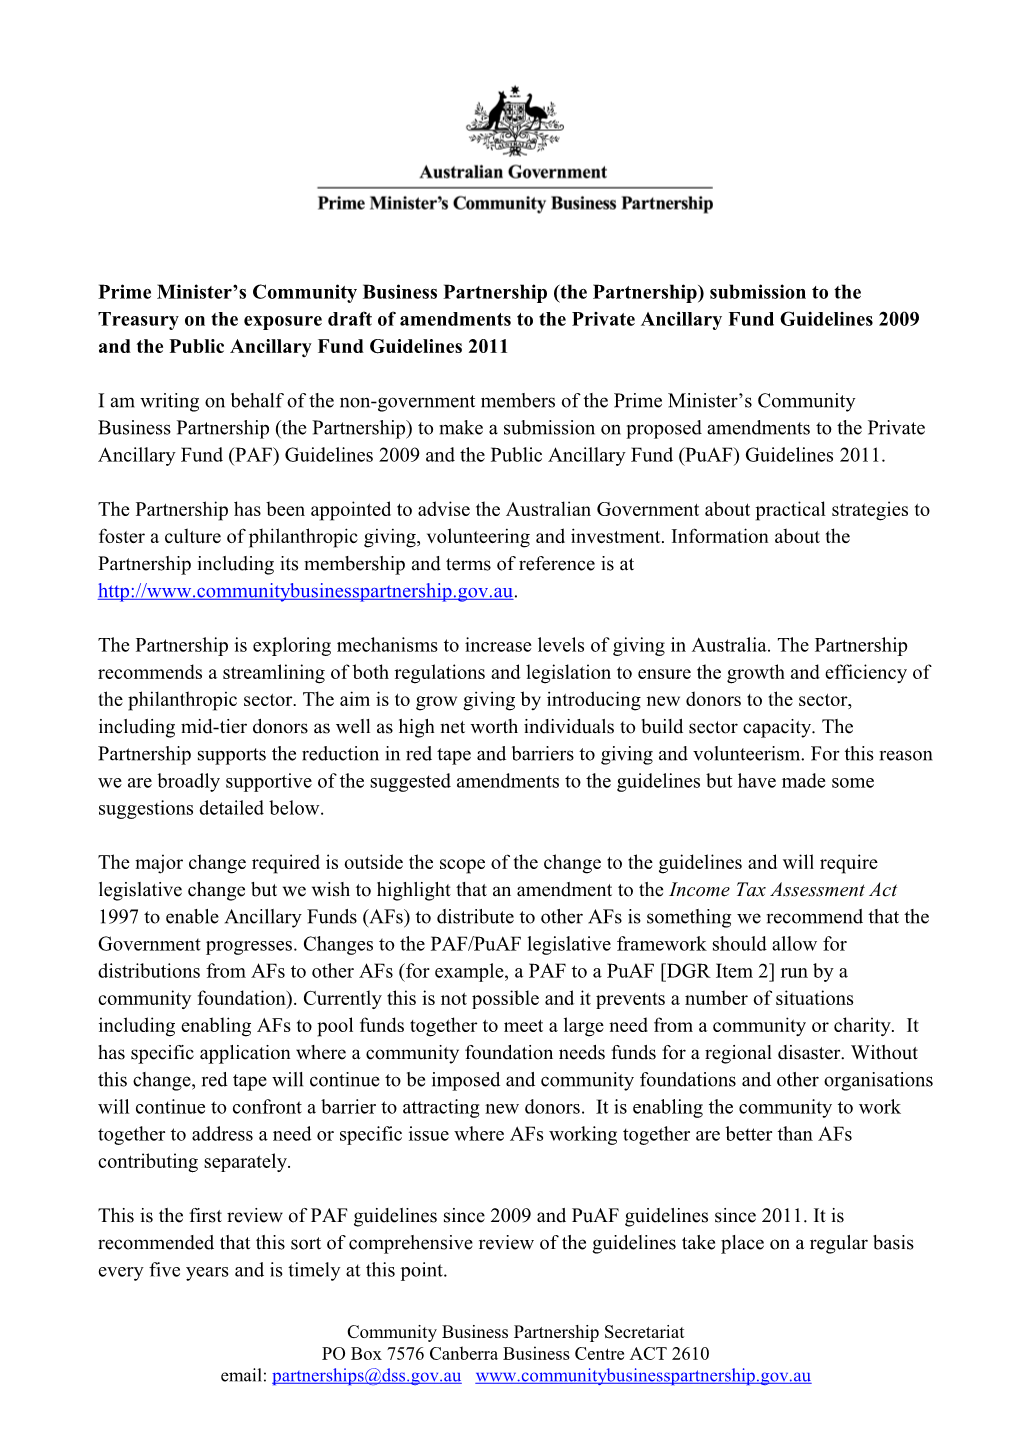 Prime Minister S Community Business Partnership (The Partnership)Submission to the Treasury